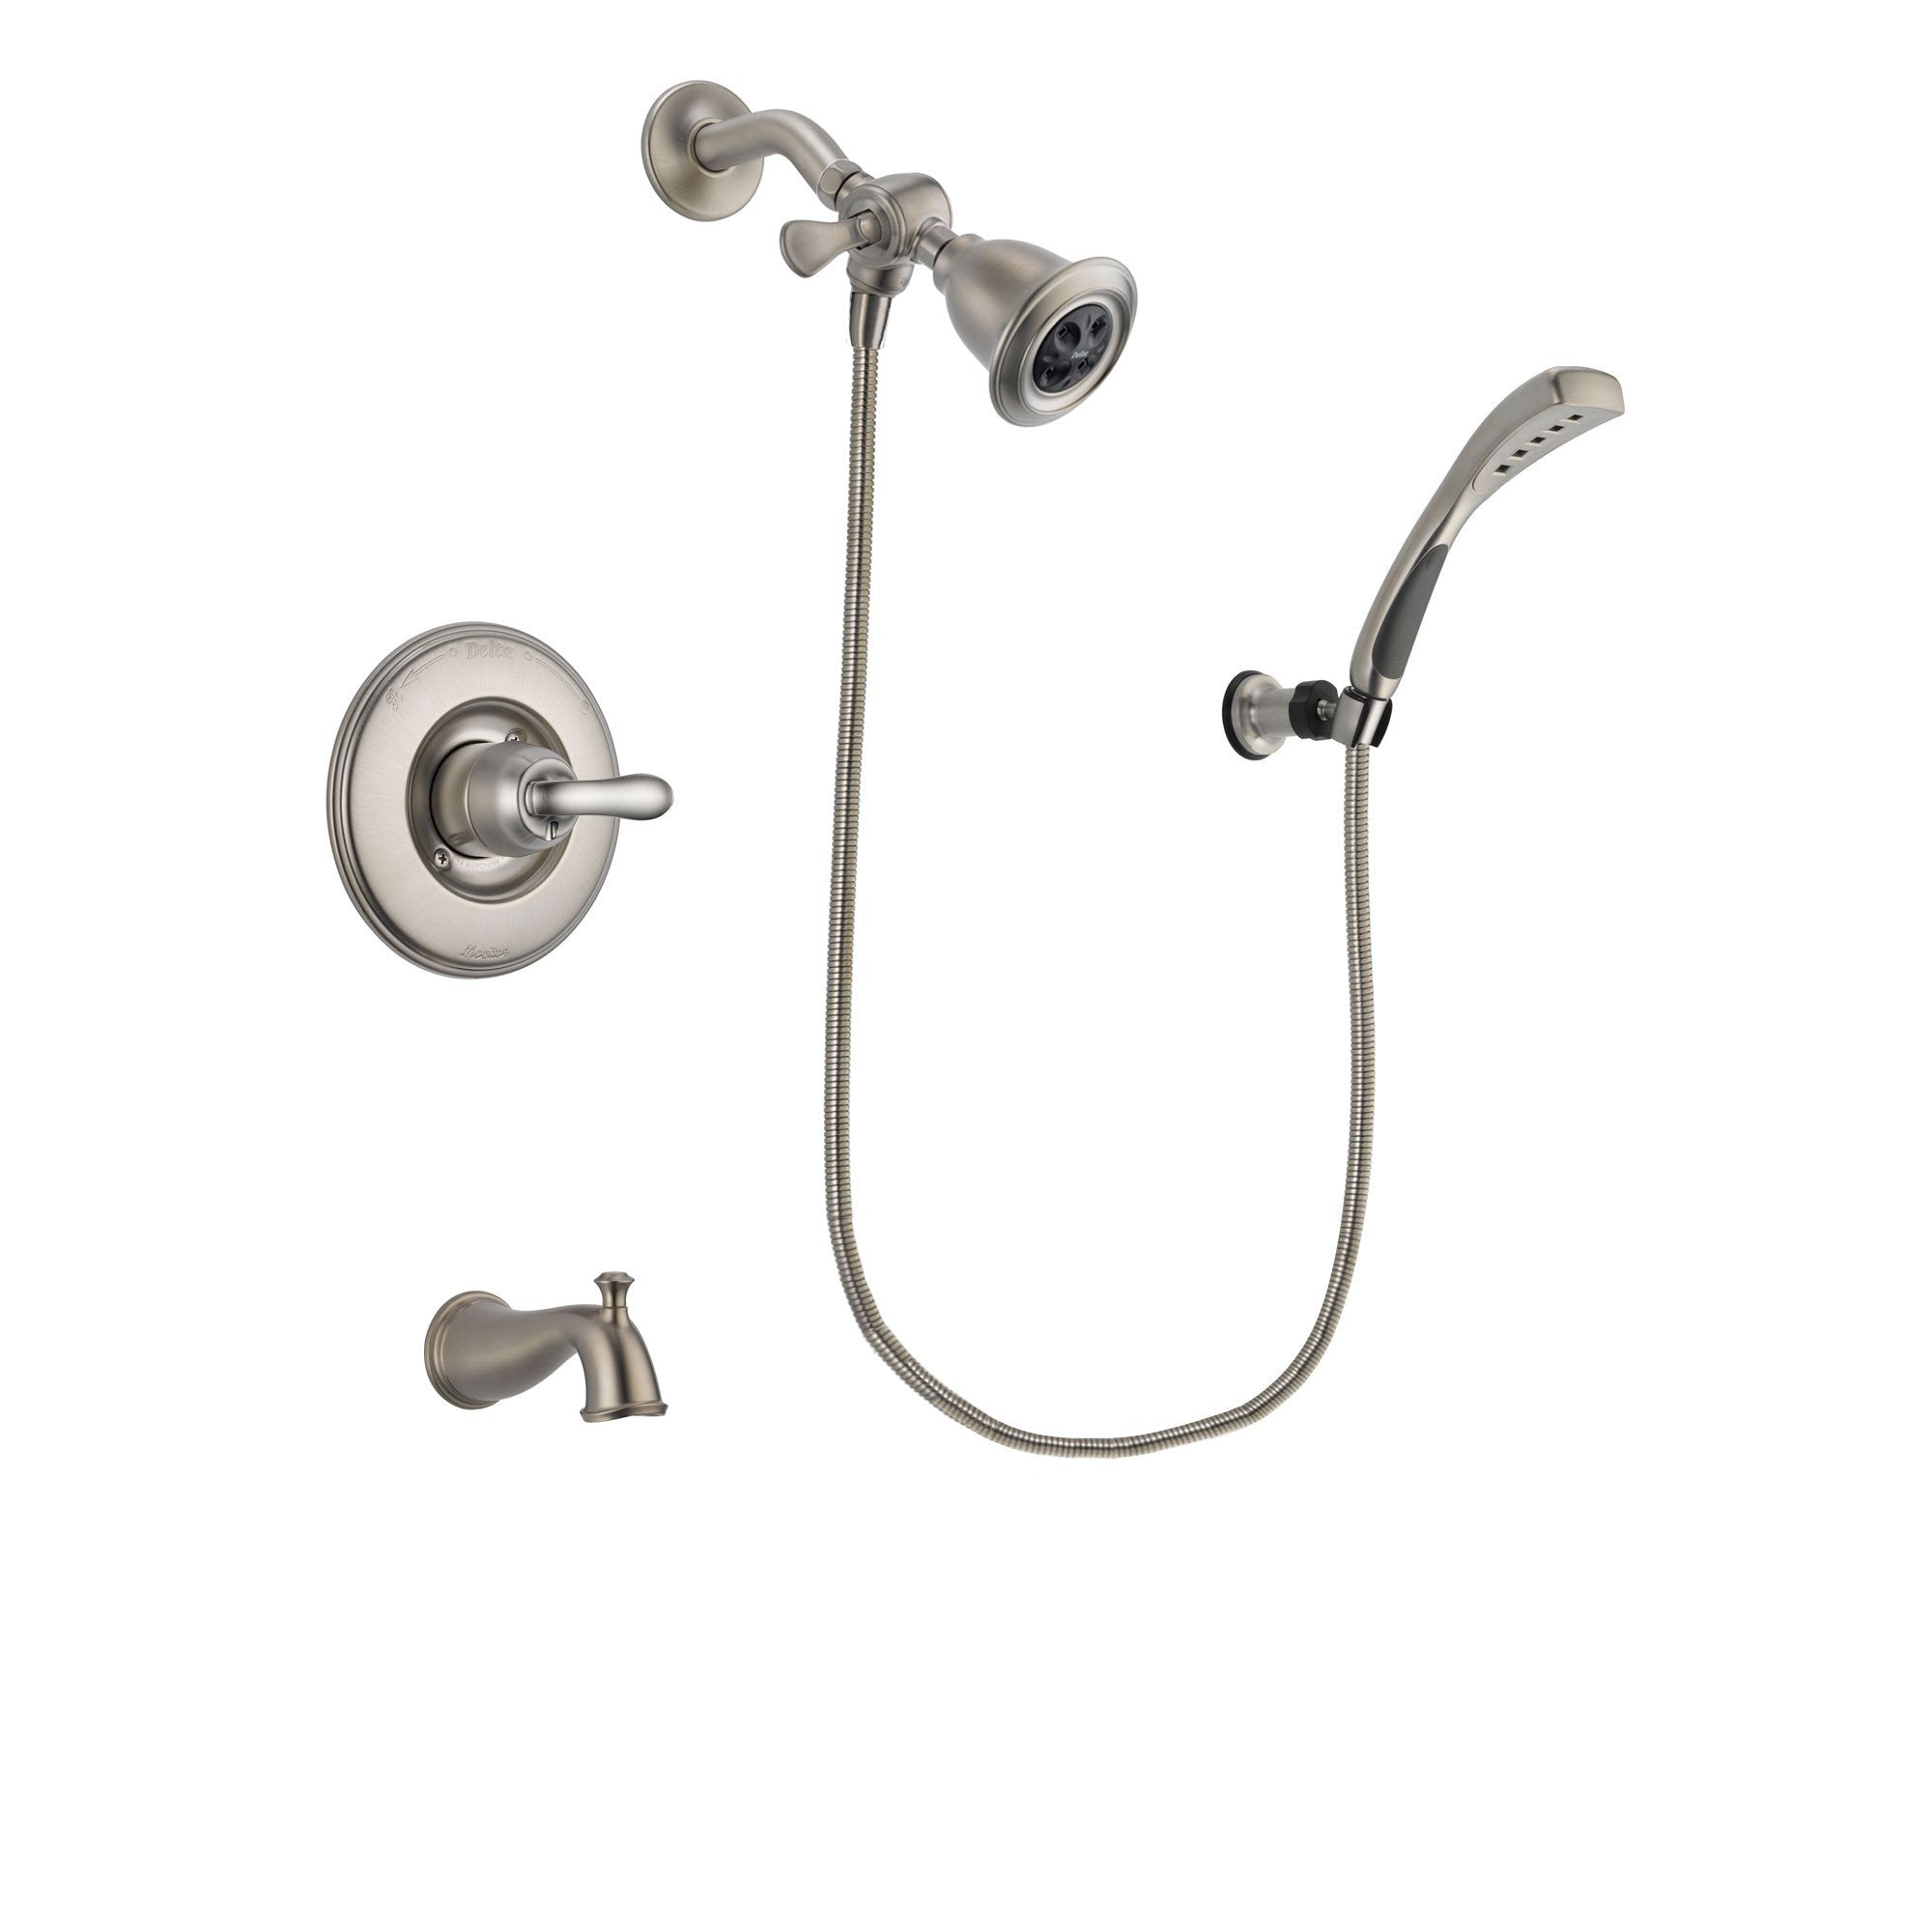 Delta Linden Stainless Steel Finish Tub and Shower Faucet System Package with Water Efficient Showerhead and Wall Mounted Handshower Includes Rough-in Valve and Tub Spout DSP1837V